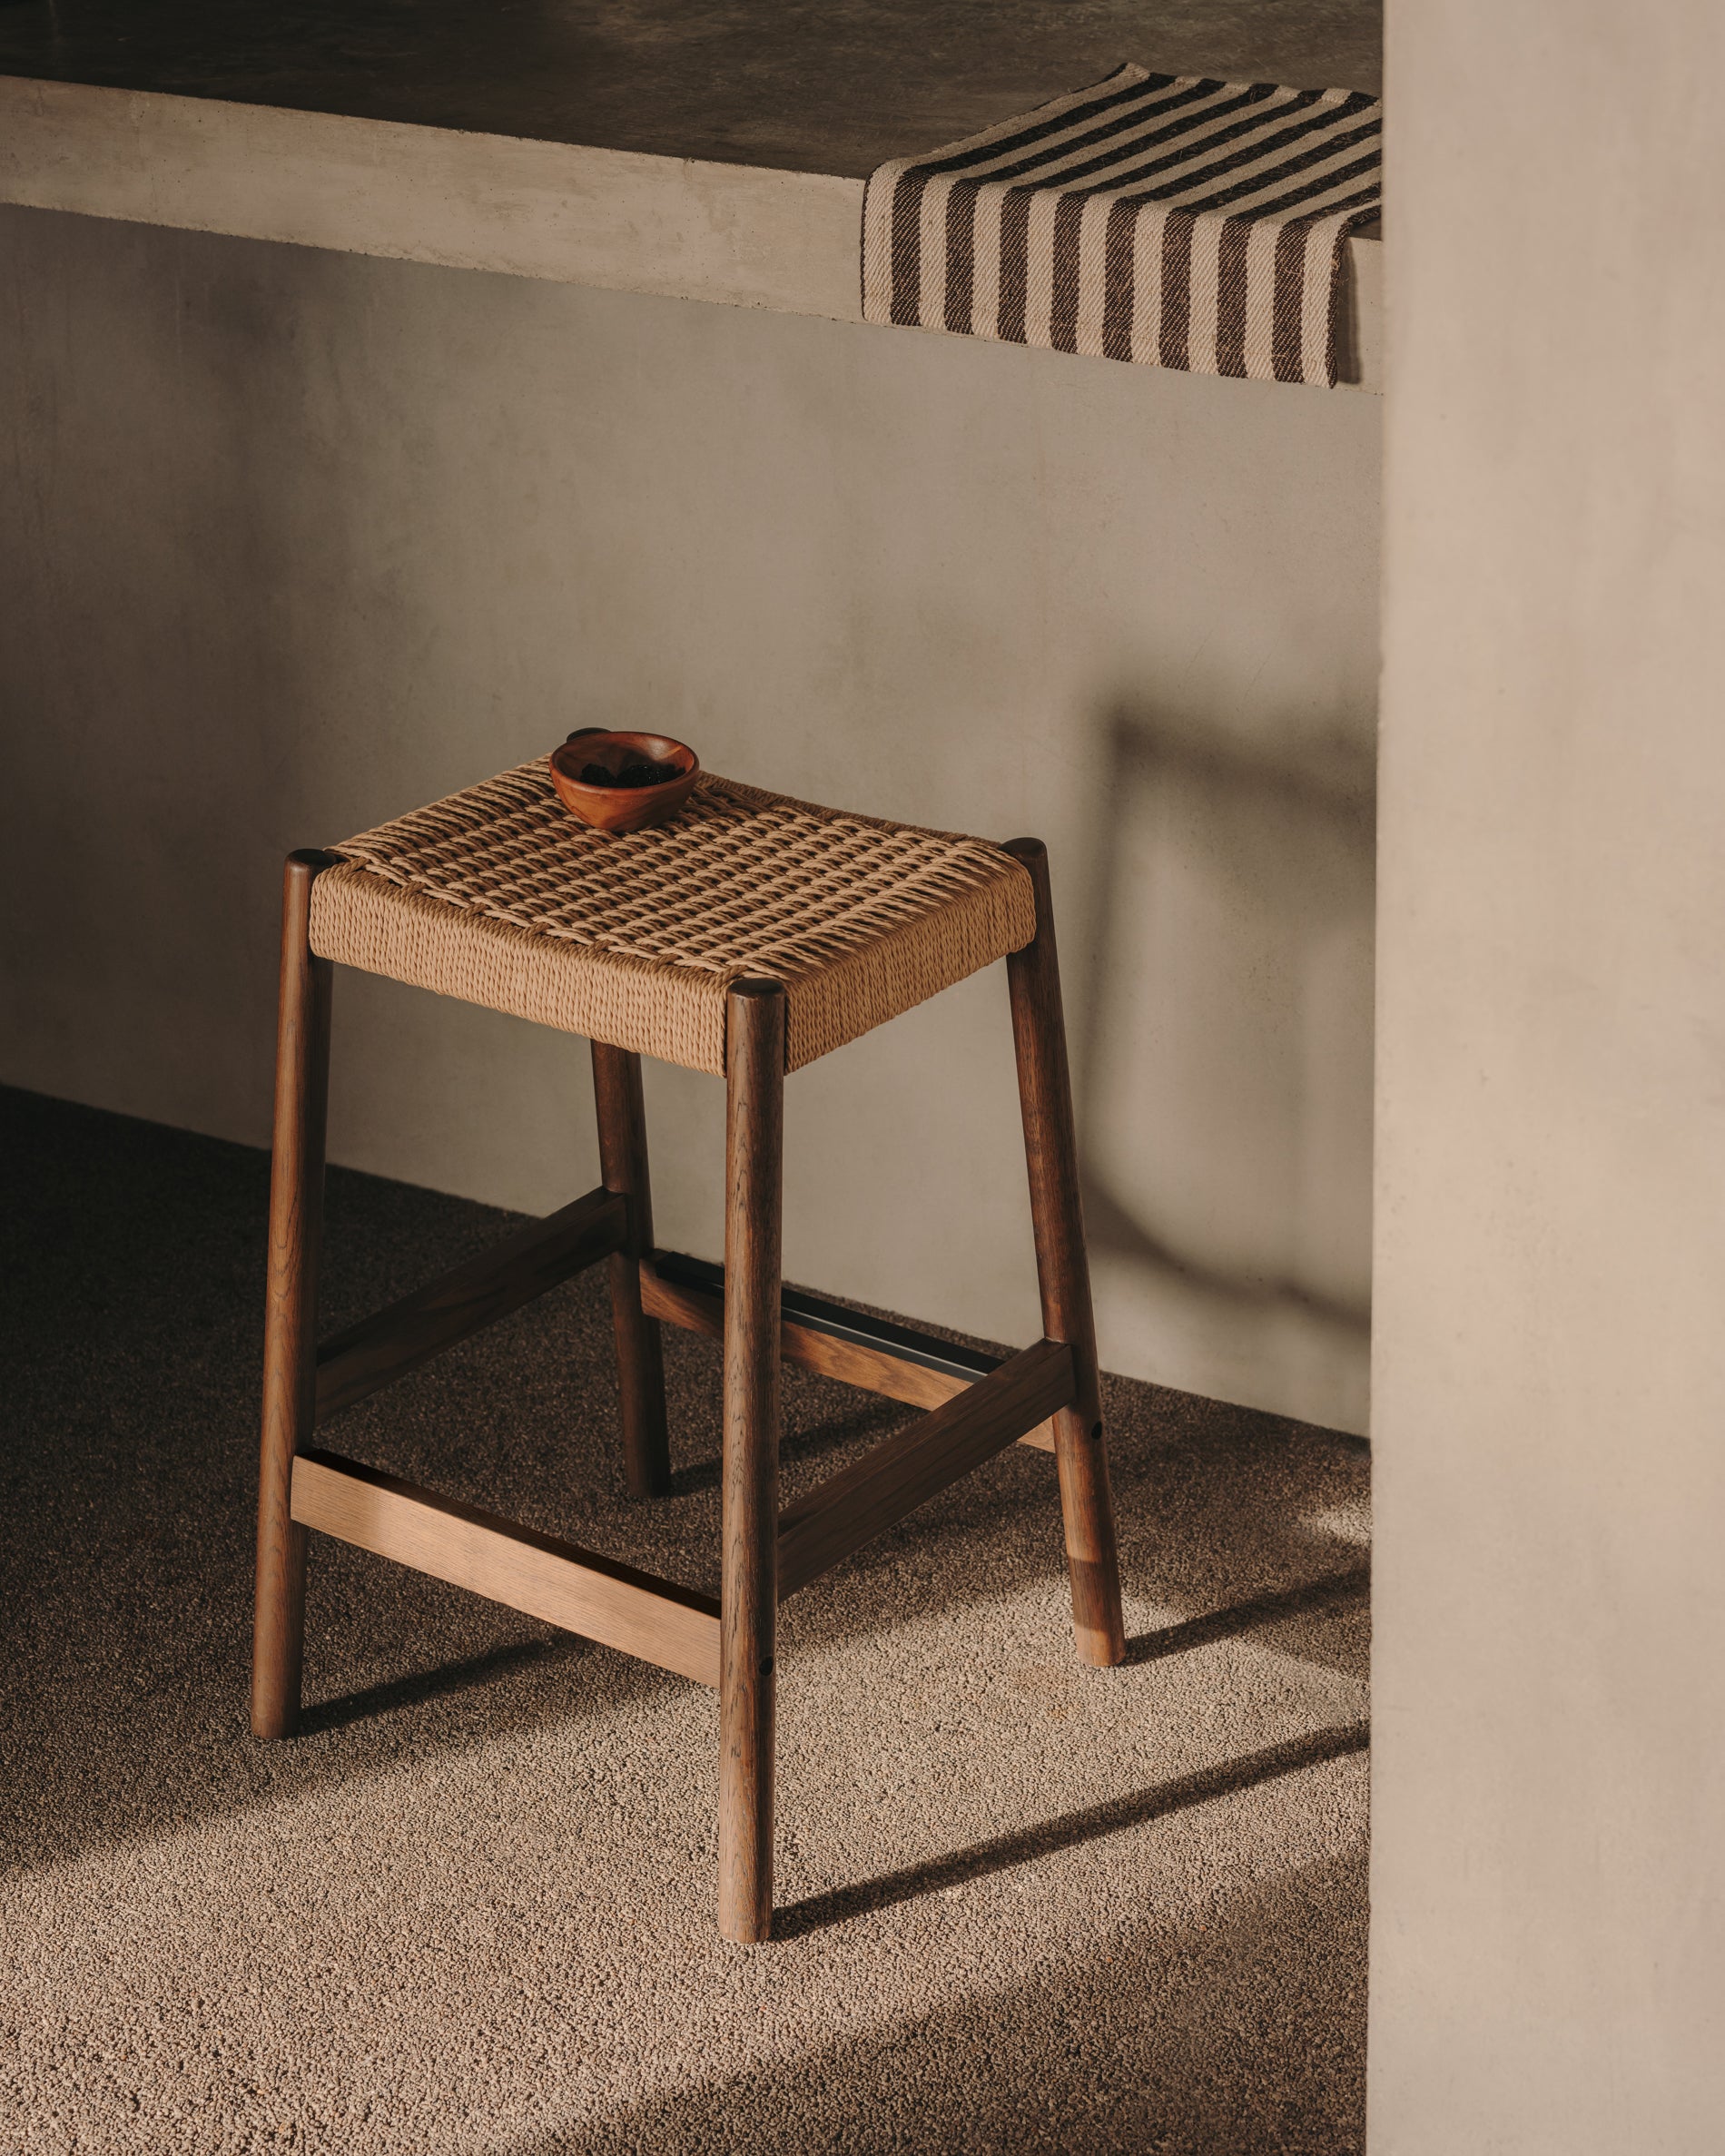 Yalia stool in solid oak with walnut finish and rope seat, height 65 cm 100% FSC